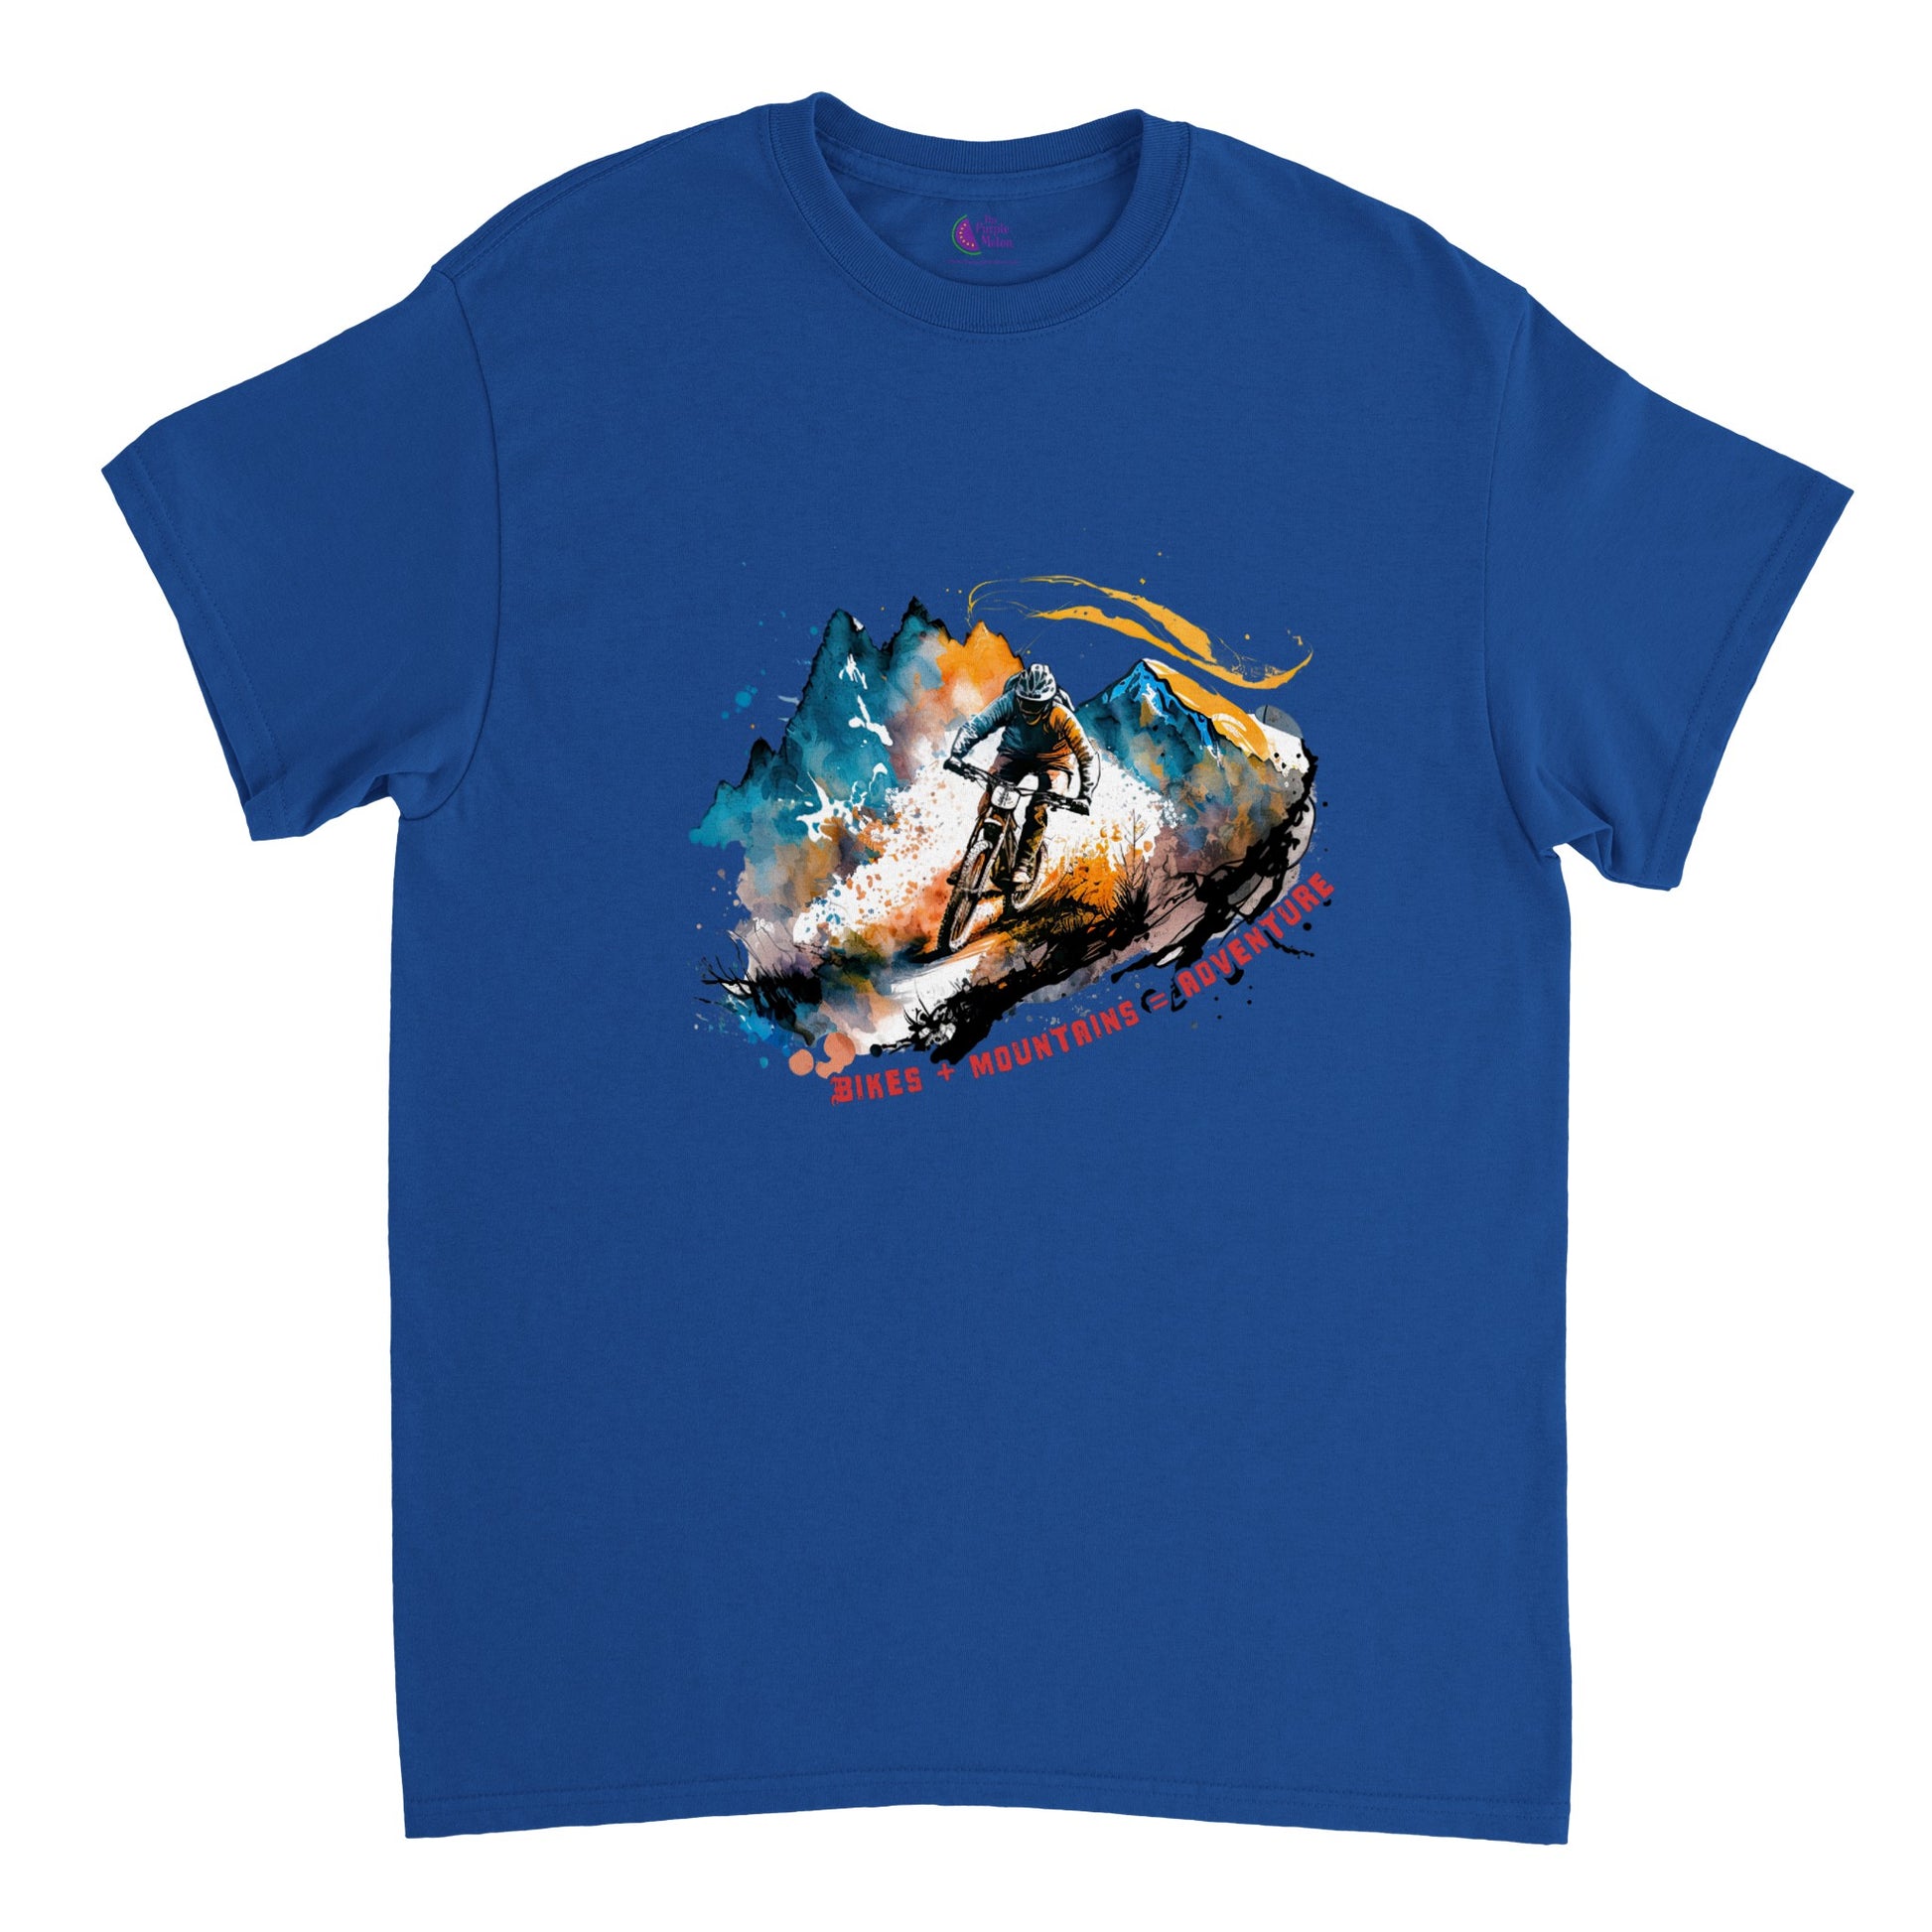 Royal blue t-shirt with a mountain bike print with the caption Bikes + Mountains = Adventure